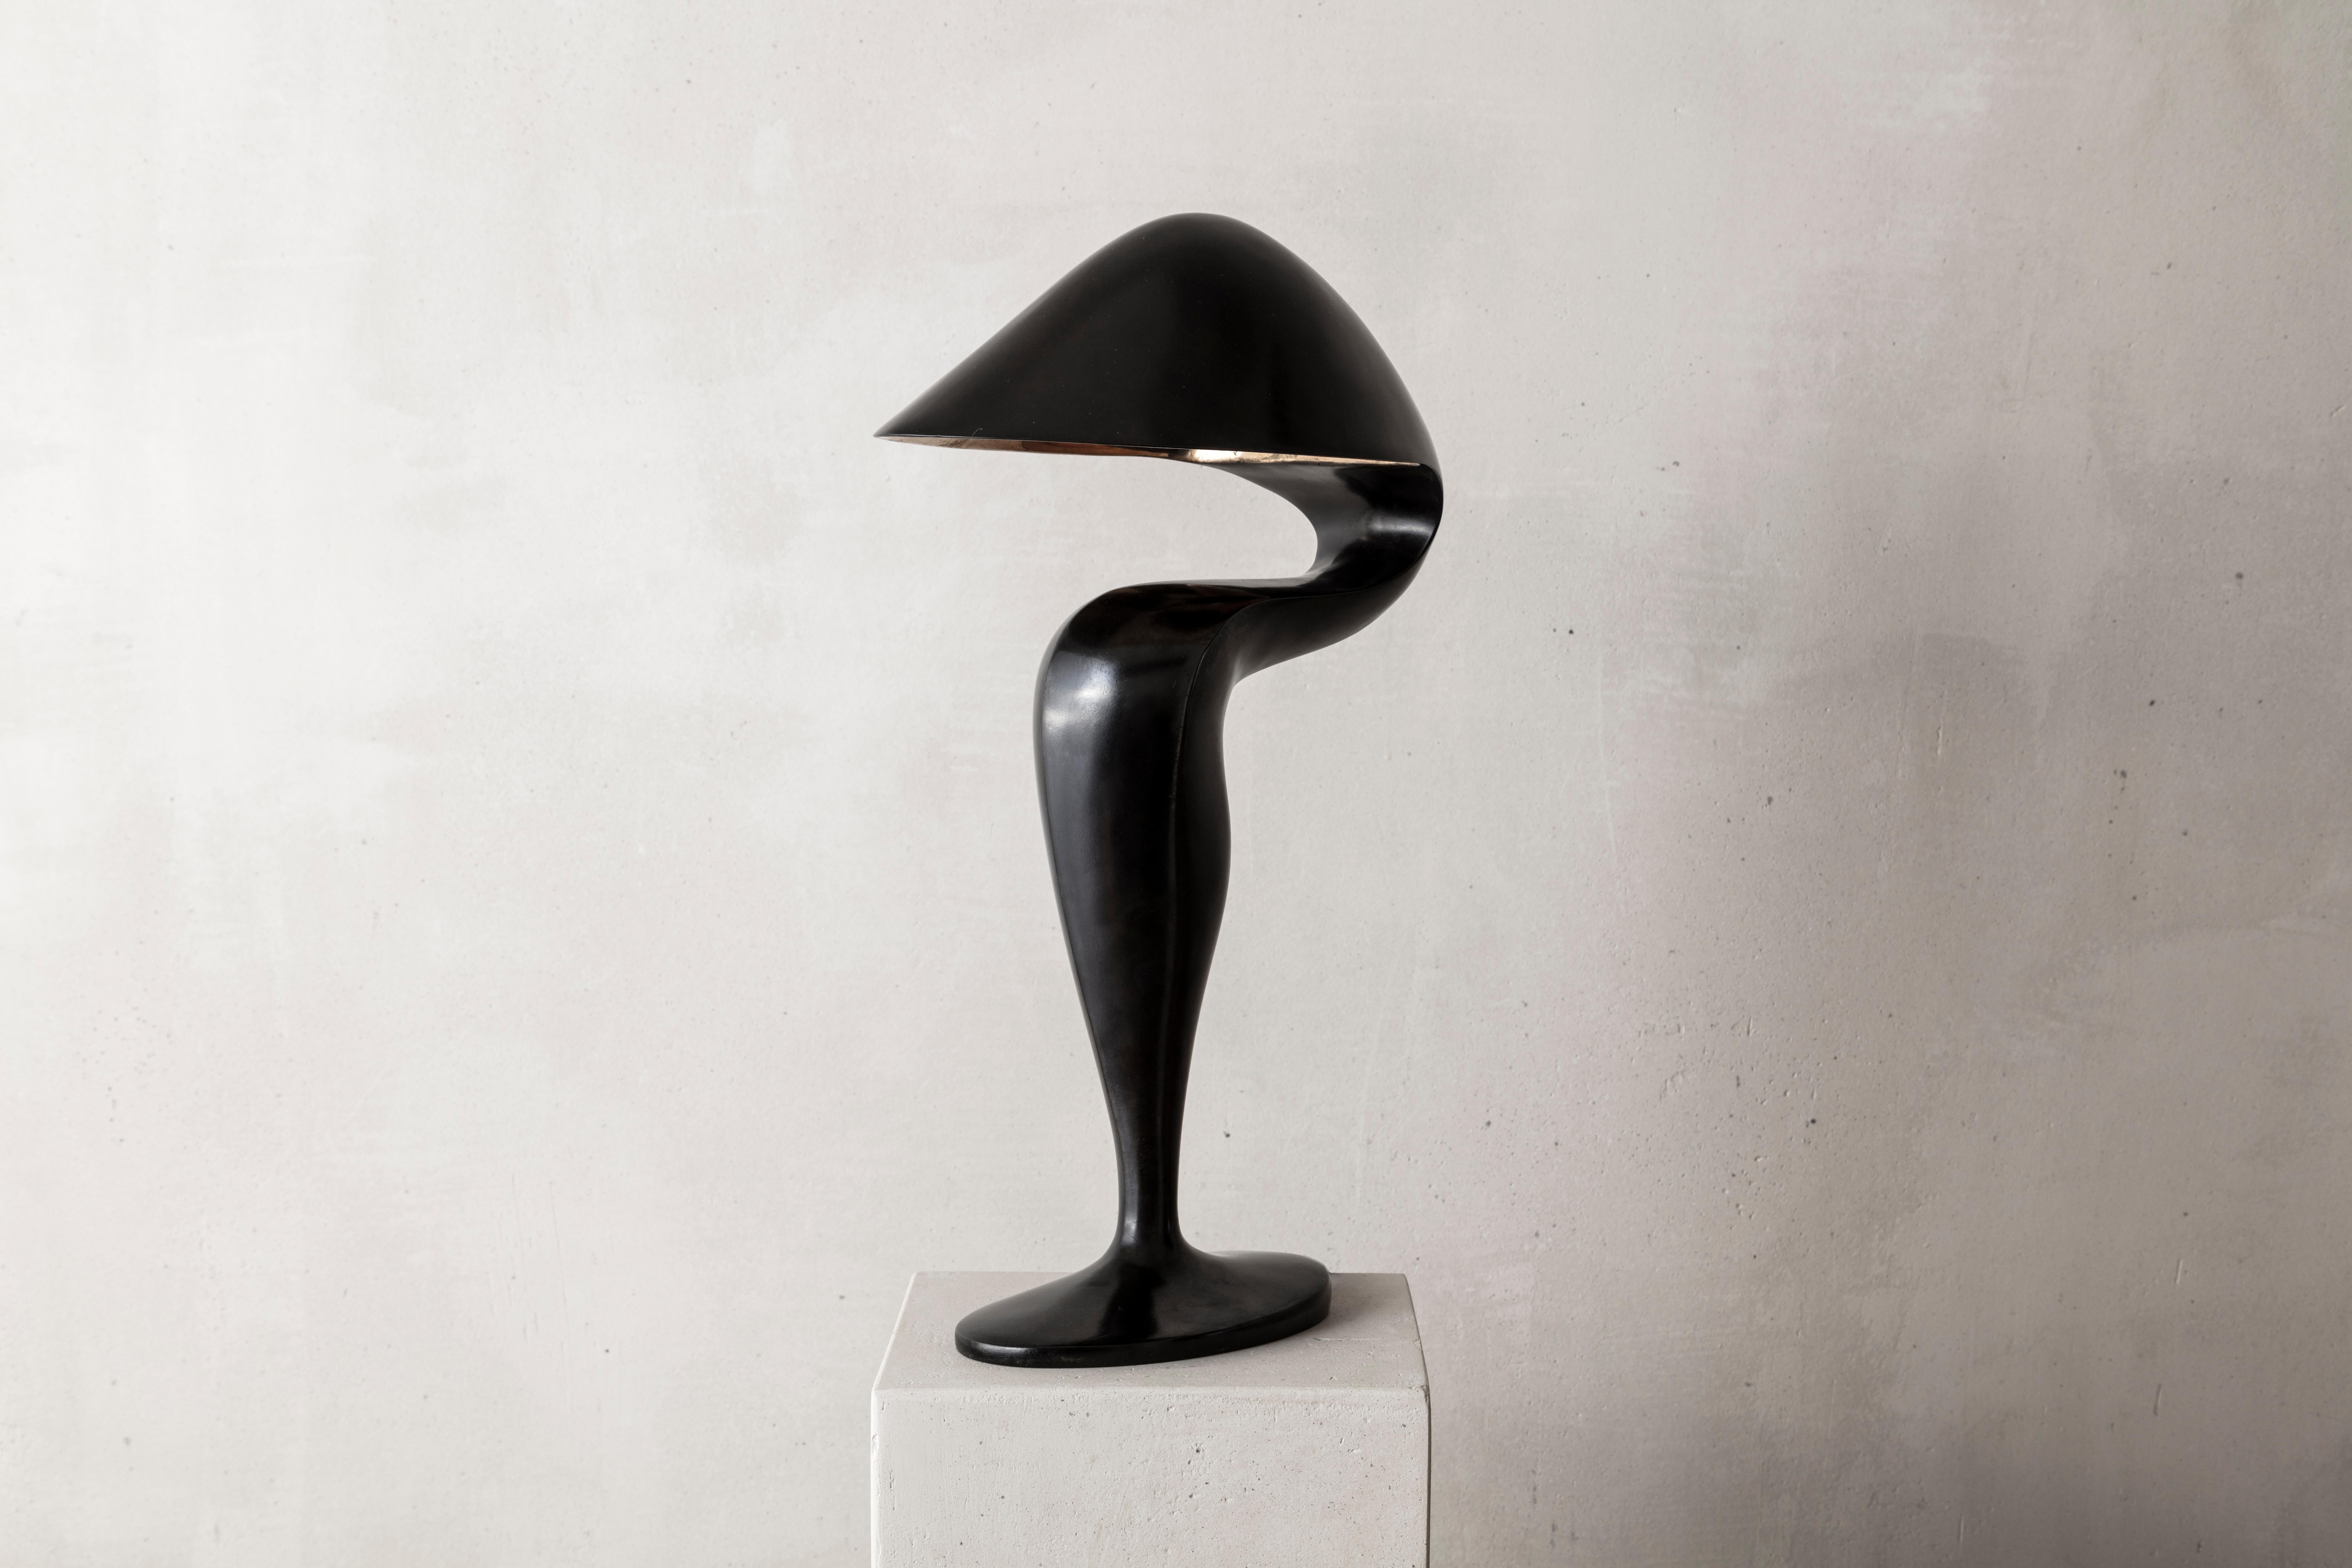 Black swan is a sculptural table lamp that combines masculine and feminine elegance with its cast bronze material and the softness of its silhouette. The pieces are cast in Paris by French Art foundry, Fonderie Chapon.

The warm glow of the light